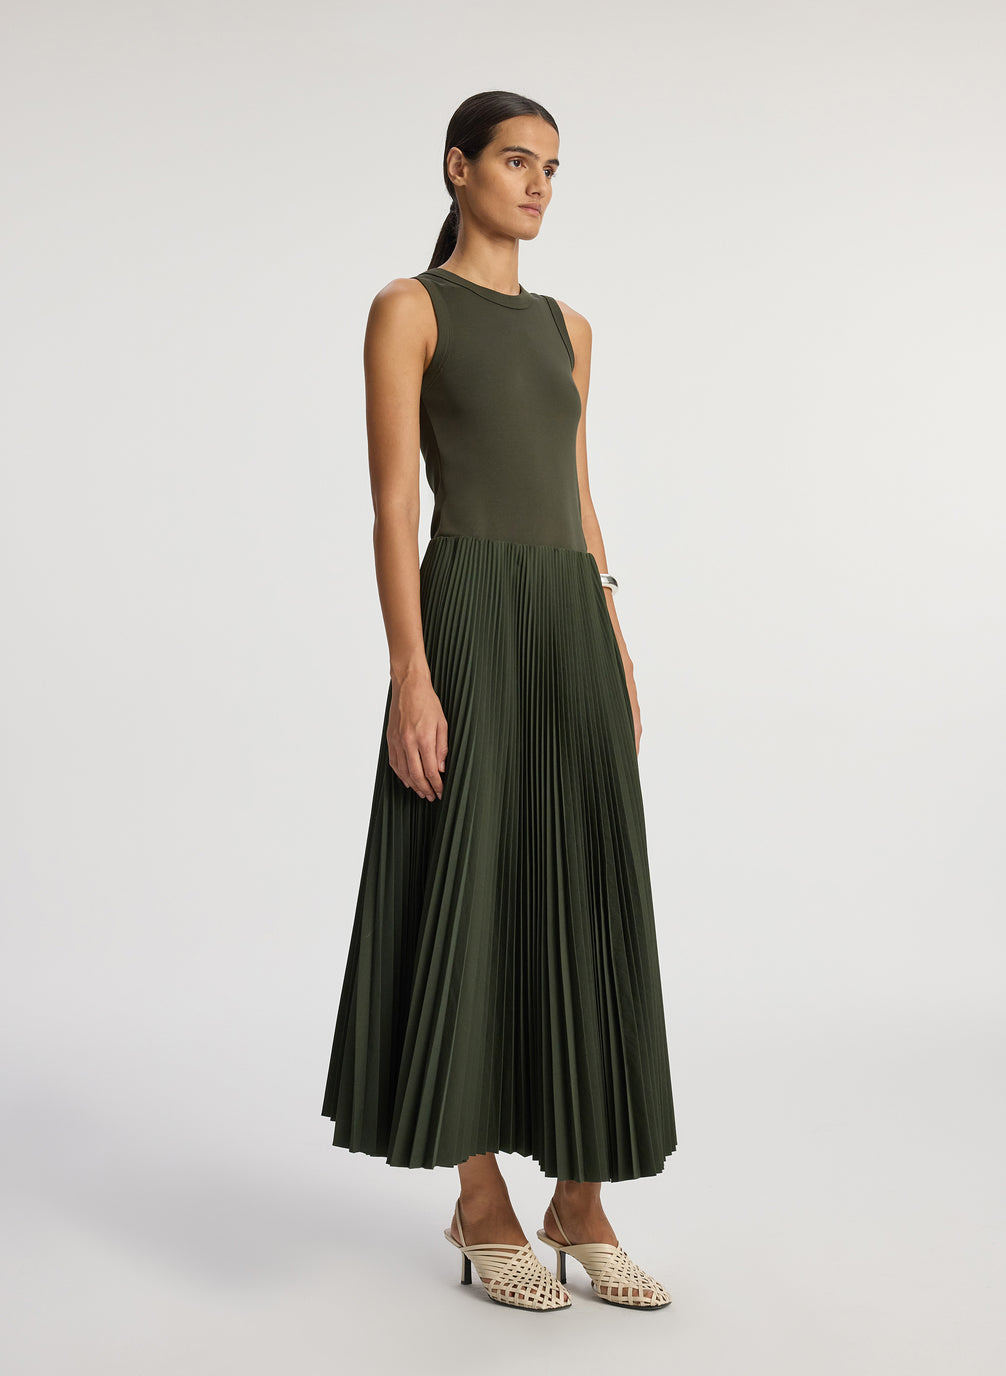 front view of woman wearing olive green tank with olive green pleated midi skirt